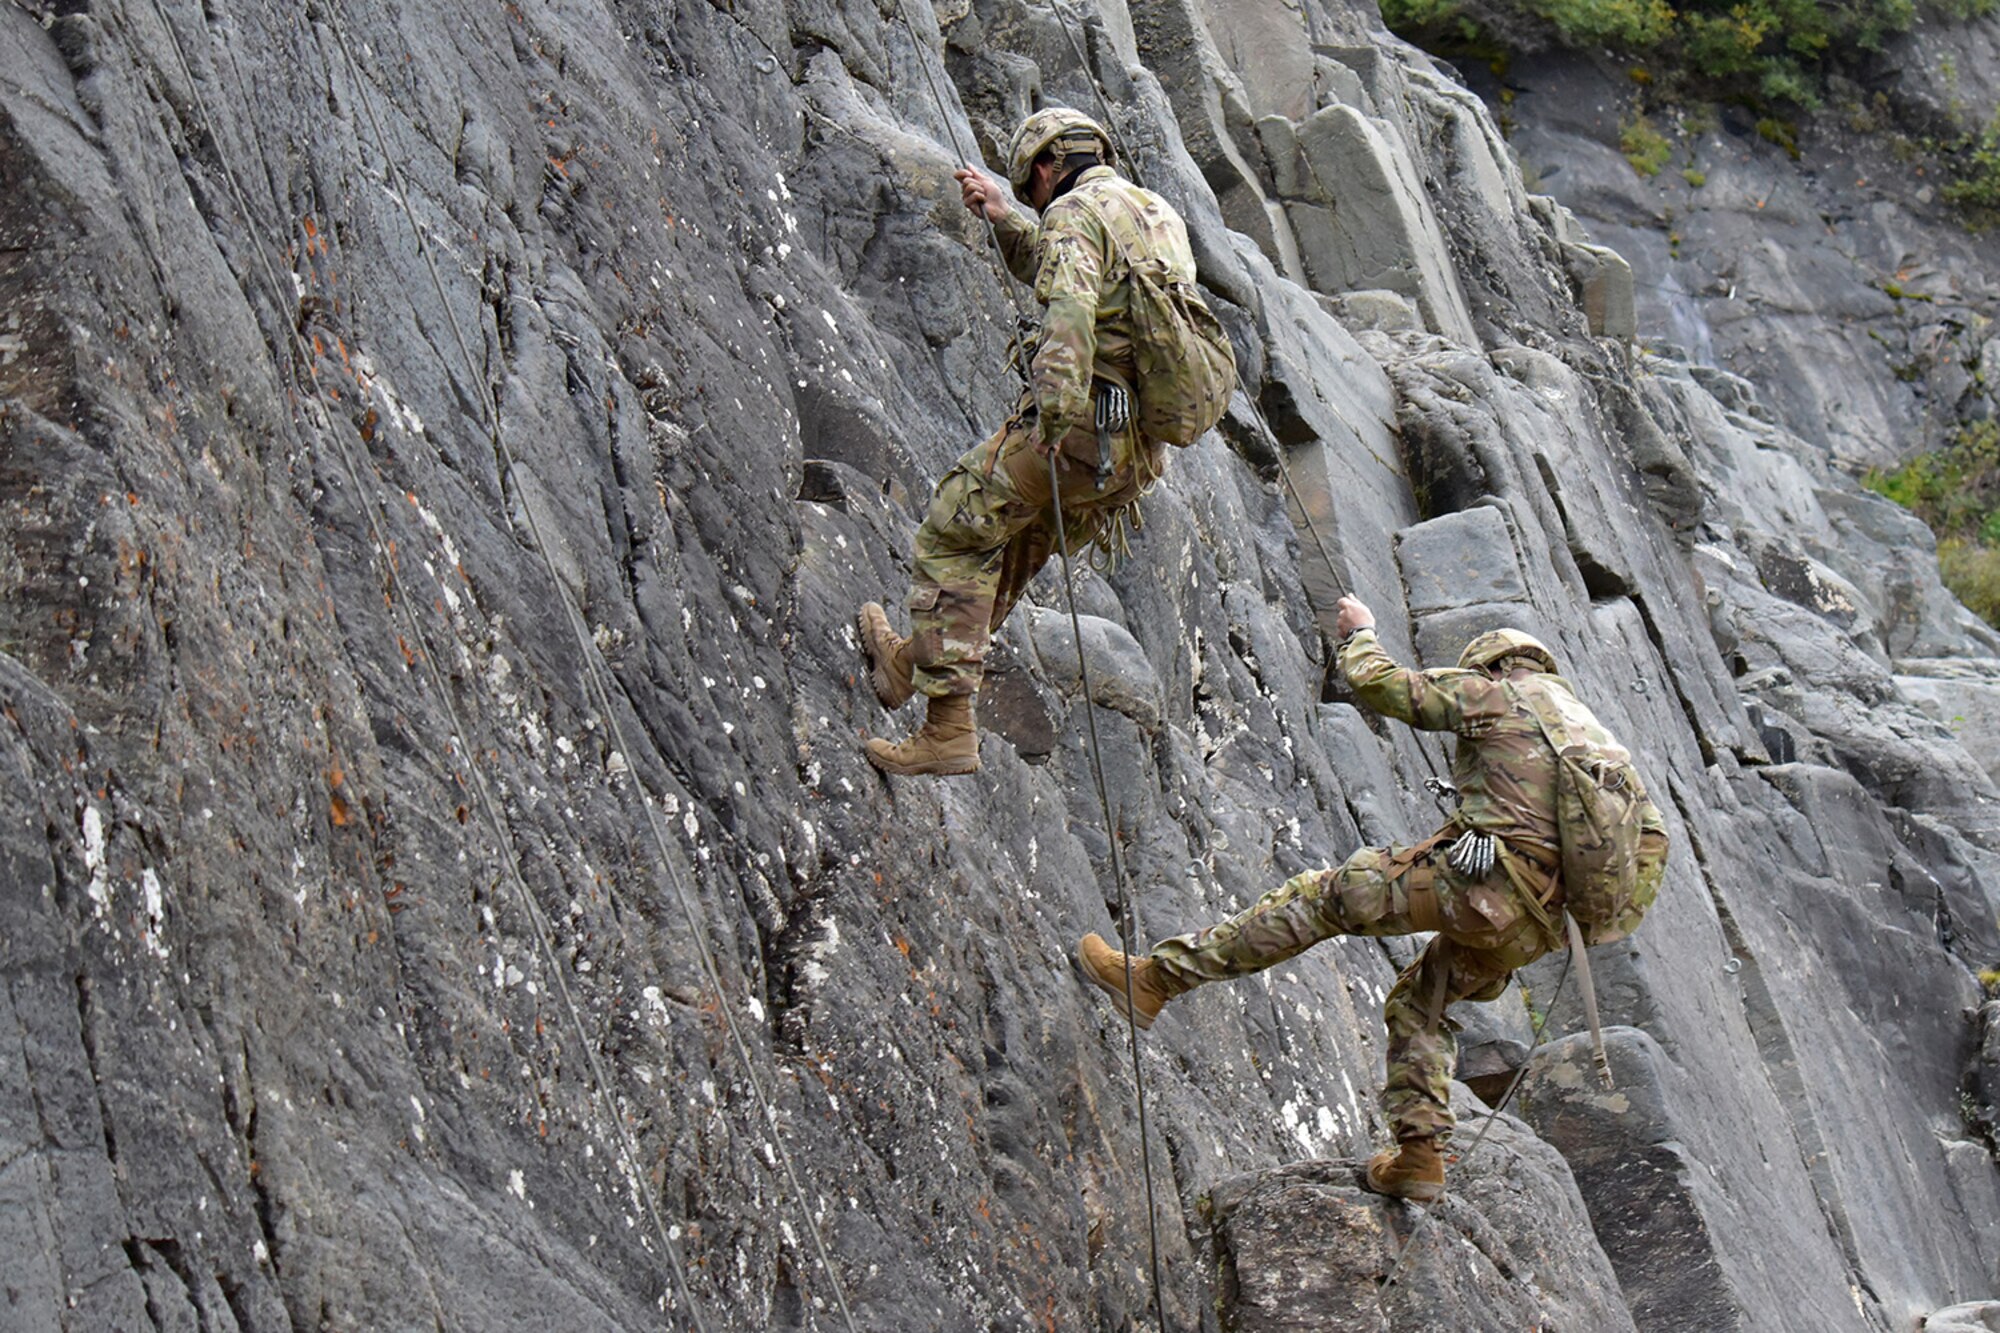 A pair of Advanced Military Mountaineering Course students rappel down a rock face at the Northern Warfare Training Center’s Black Rapids Site during training. NWTC cadre followed Coronavirus restrictions while guiding students through both the basic and advanced mountaineering courses in August. With the advent of Alaska’s long, cold winter, NWTC’s focus is now shifting to cold weather training for the 2020-21 season.